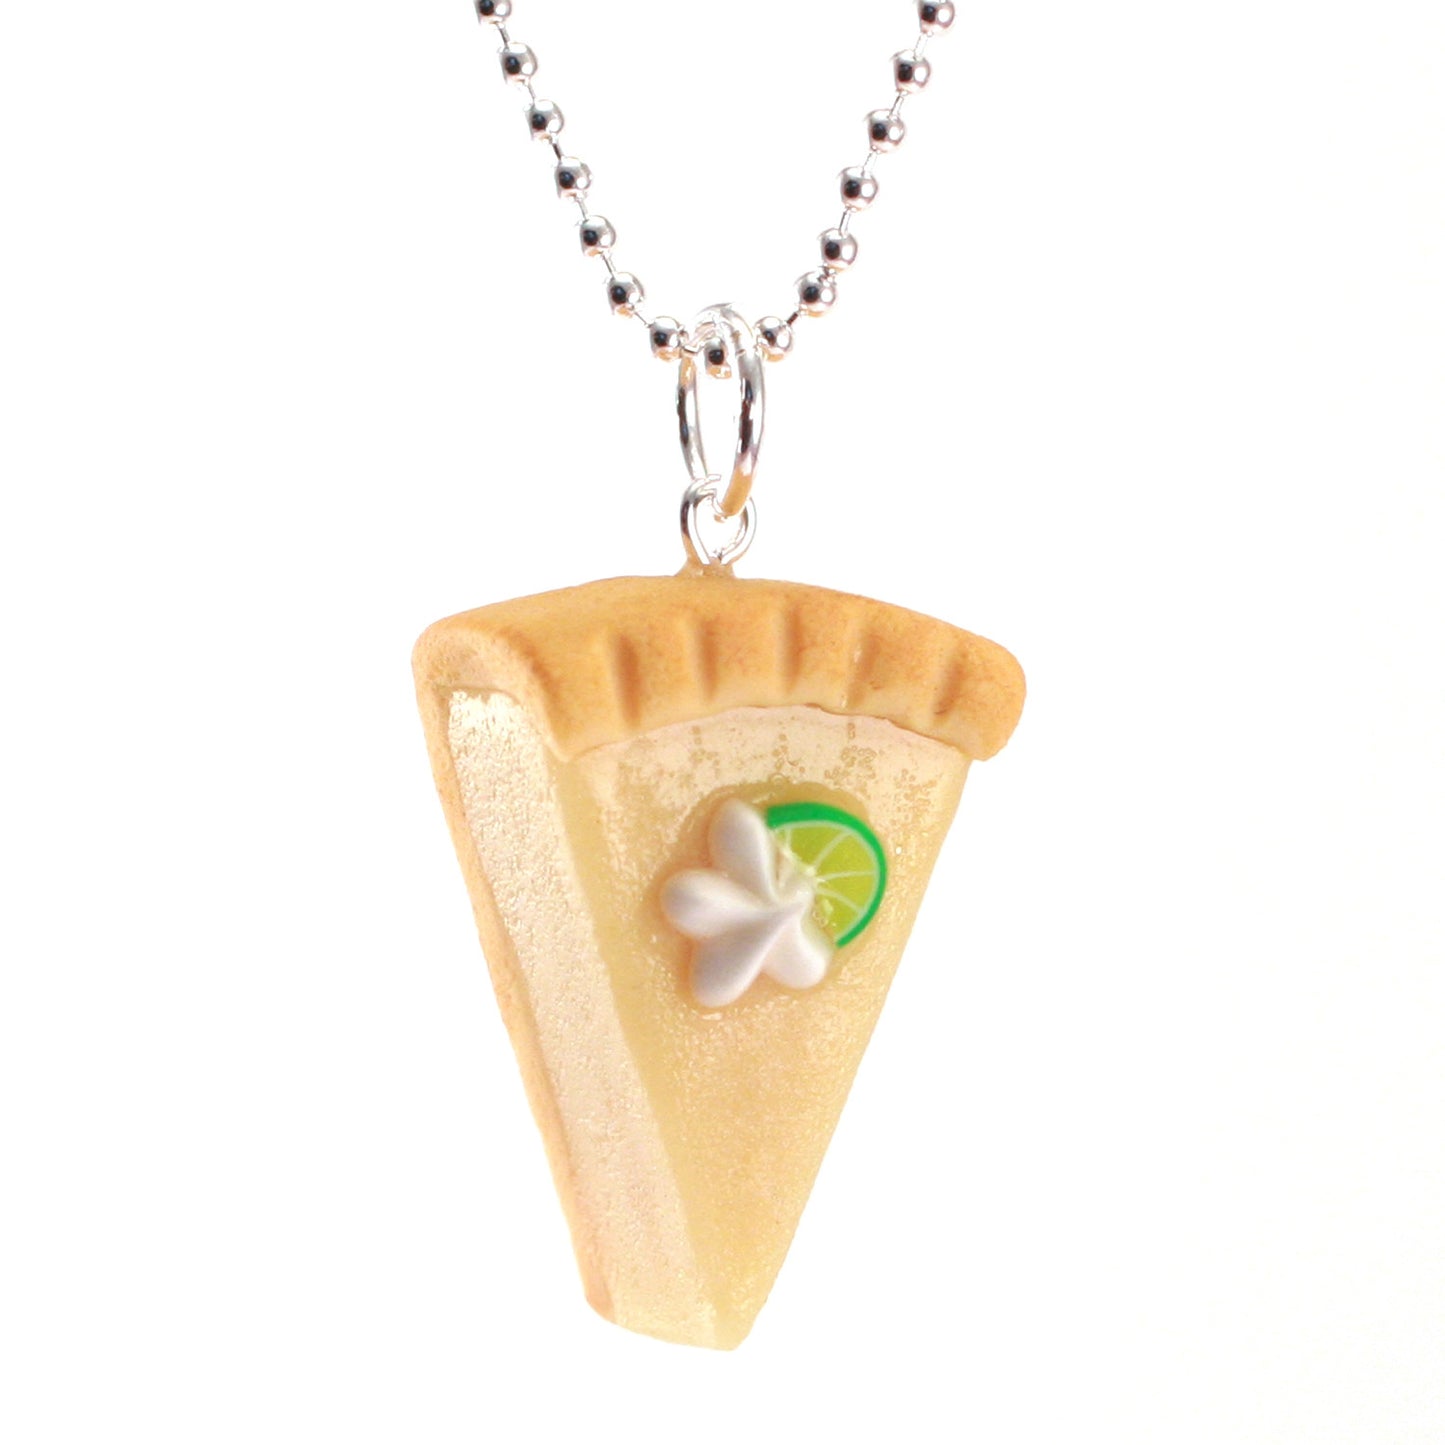 Scented Key Lime Pie Necklace - Tiny Hands
 - 1